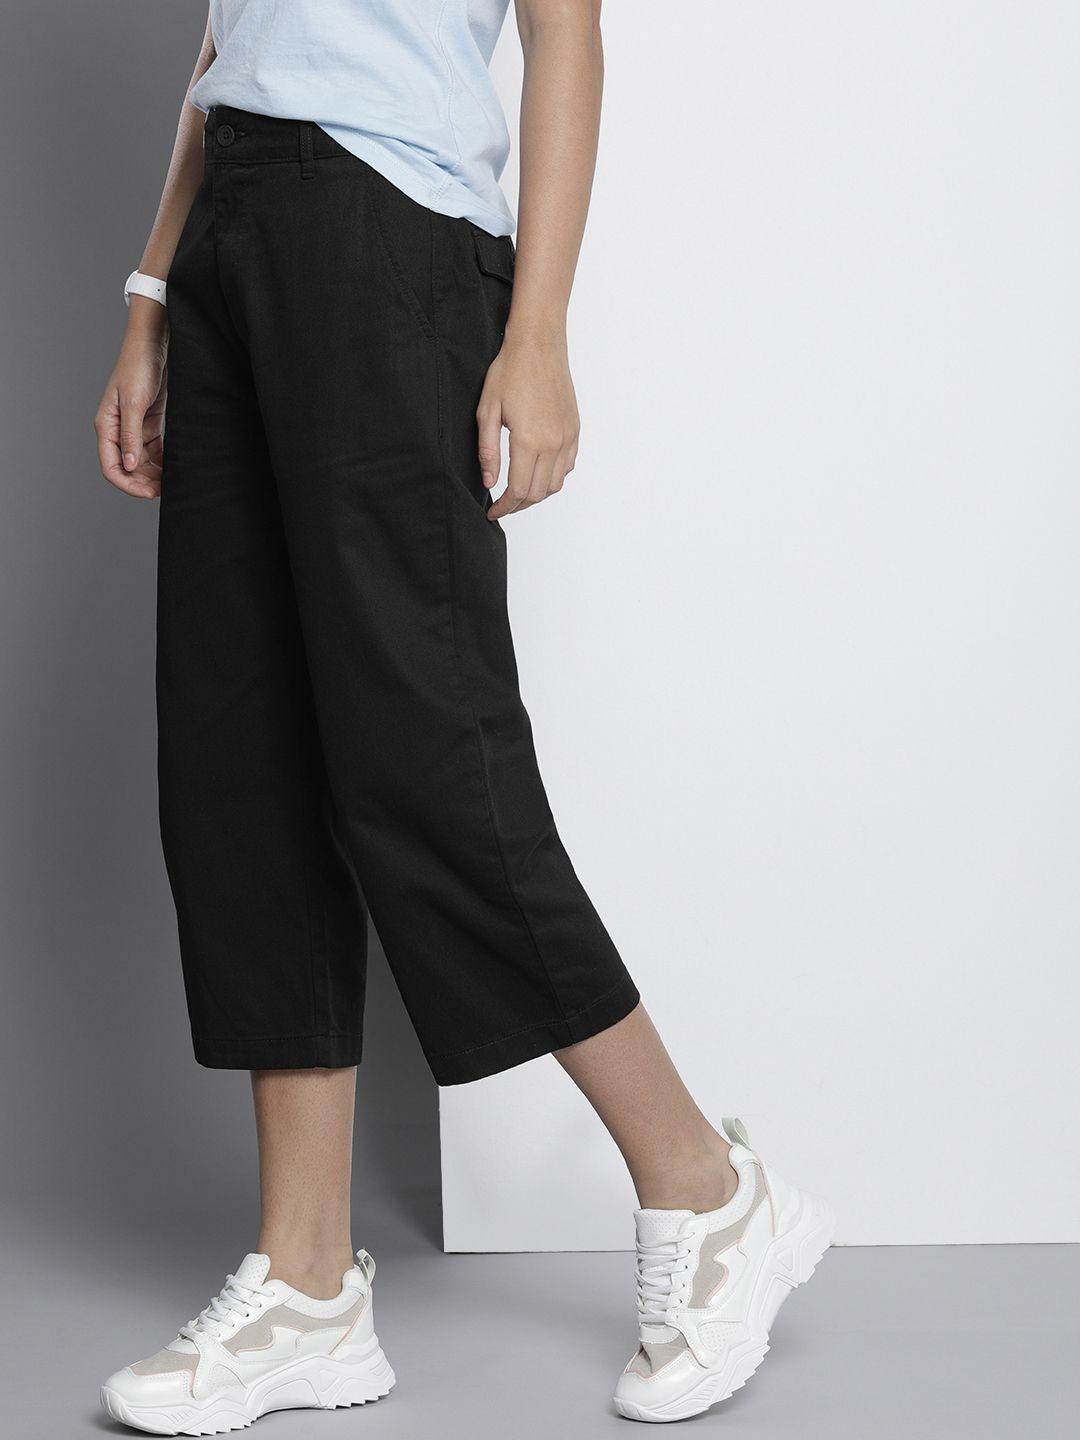 tommy-hilfiger-women-black-embroidered-cropped-organic-cotton-chinos-trousers